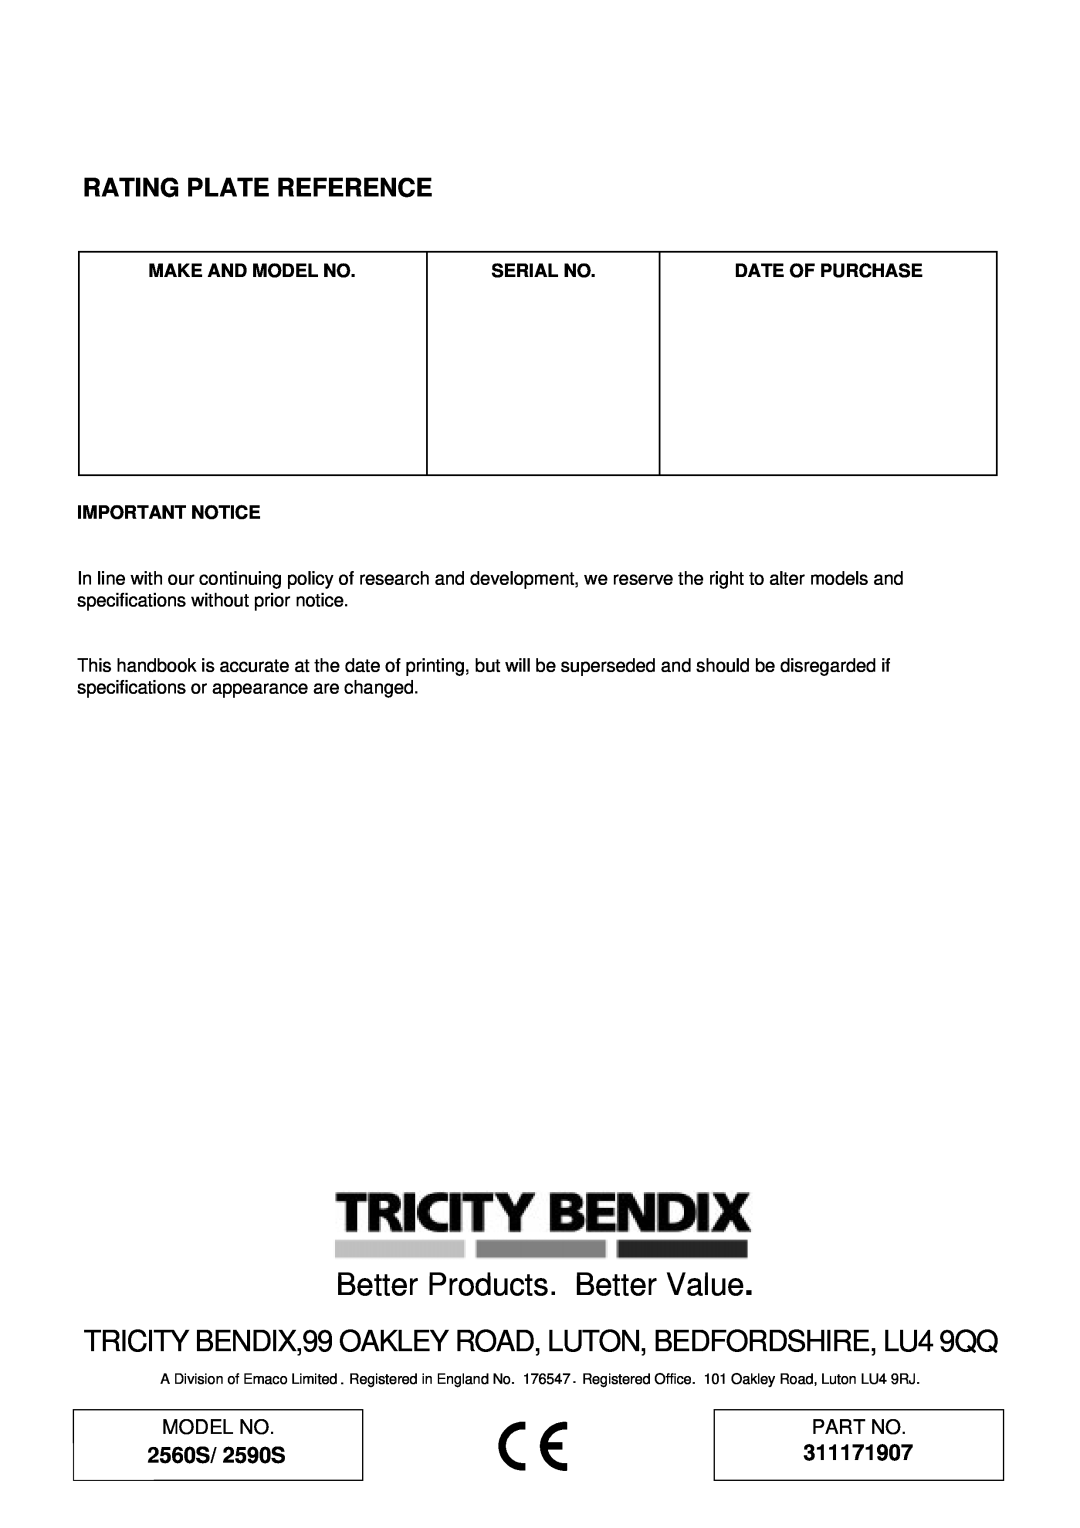 Tricity Bendix Rating Plate Reference, 311171907, Better Products. Better Value, 2560S/ 2590S, Model No, Serial No 